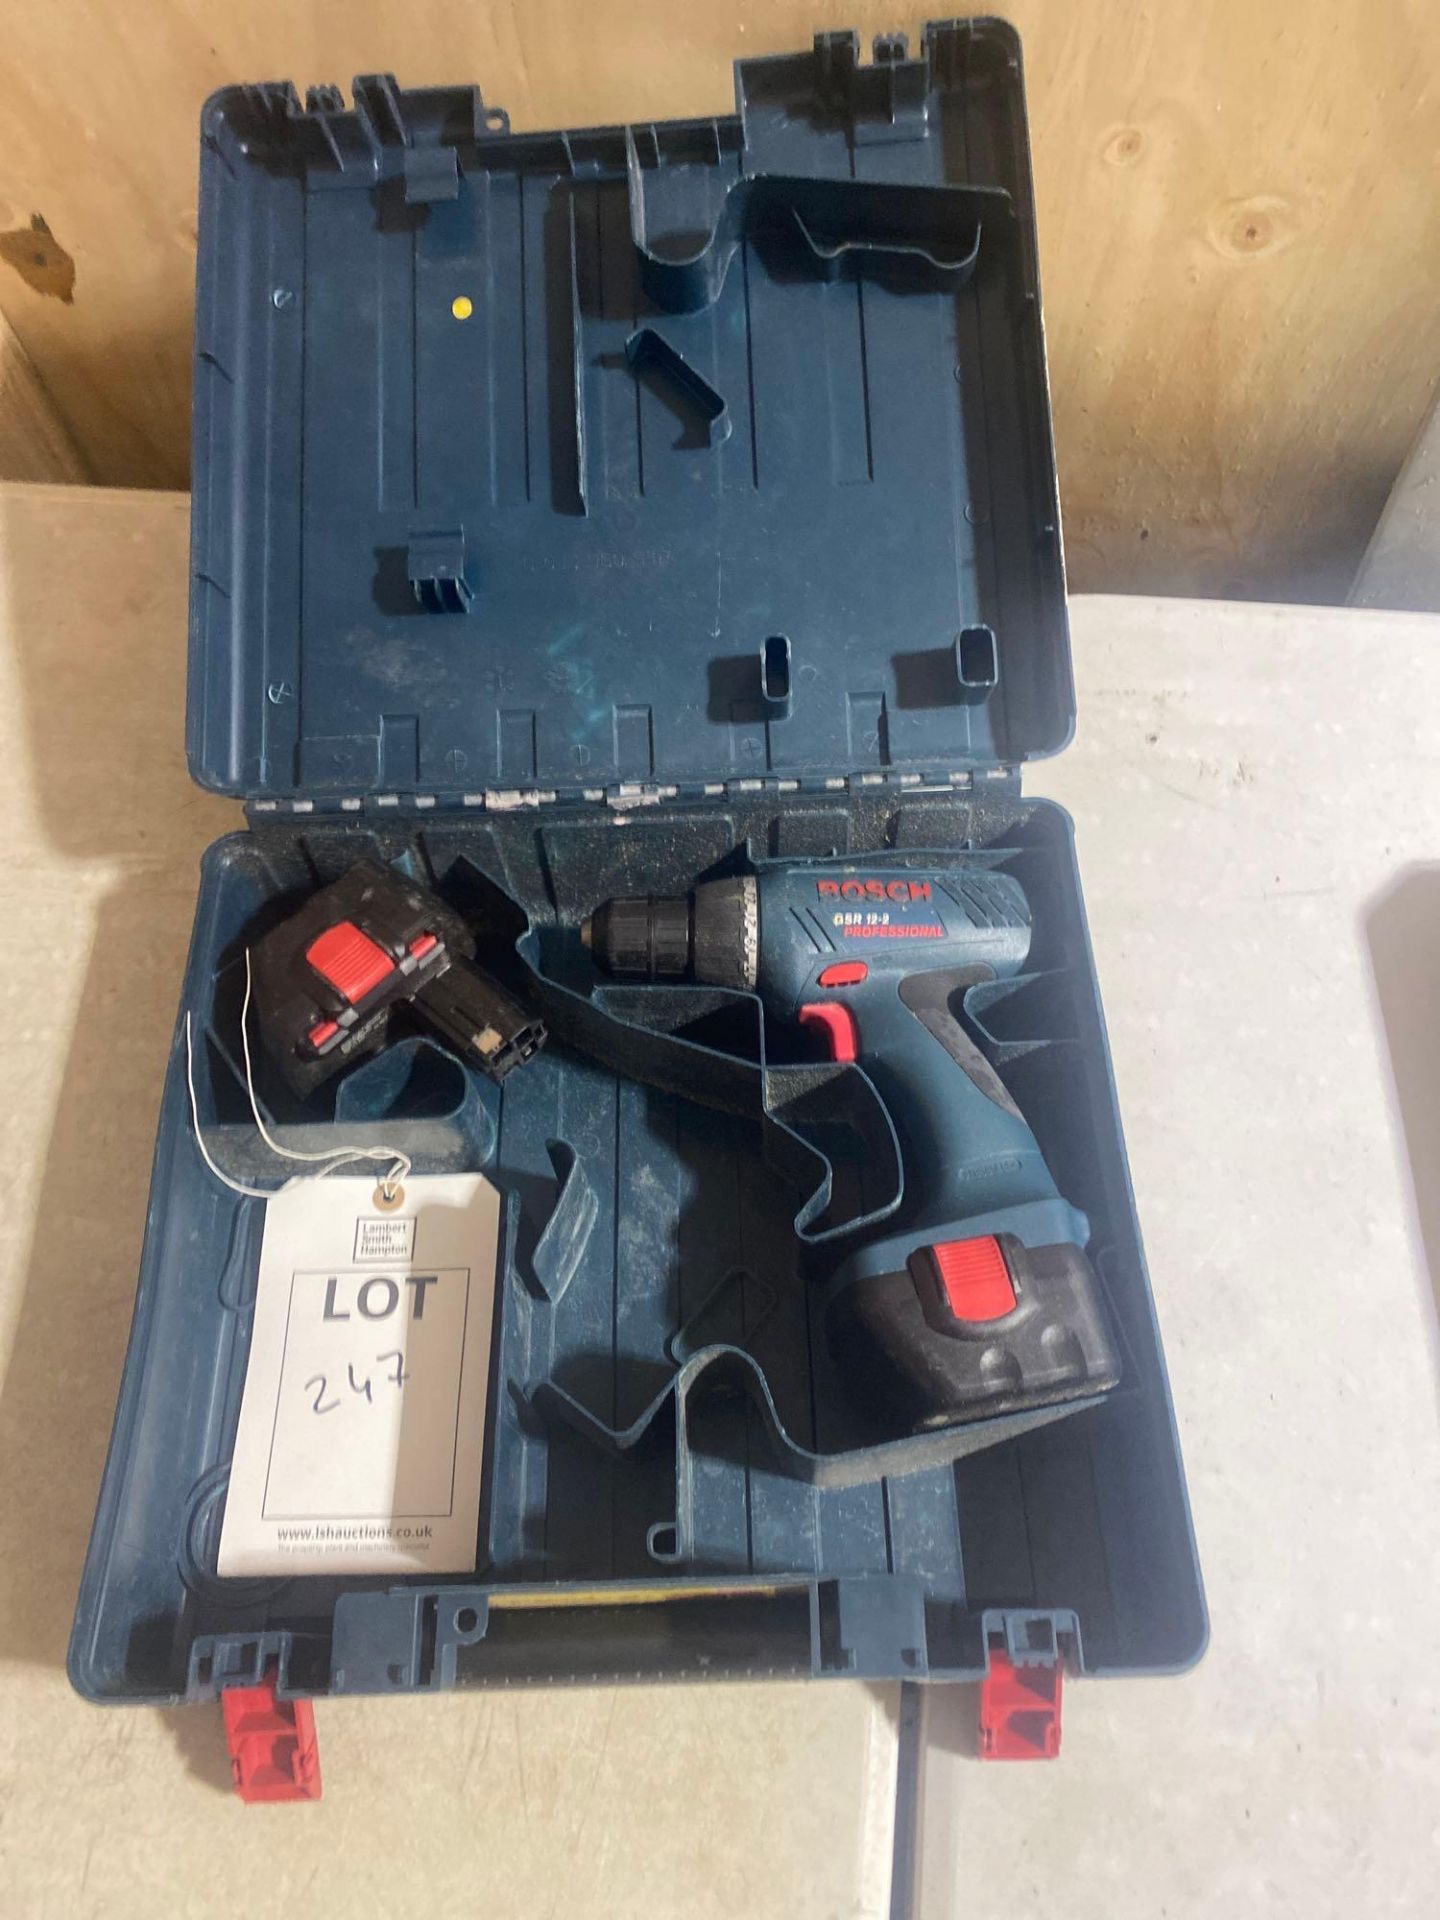 Bosch GSR-12-2 cordless drill - please note no charger